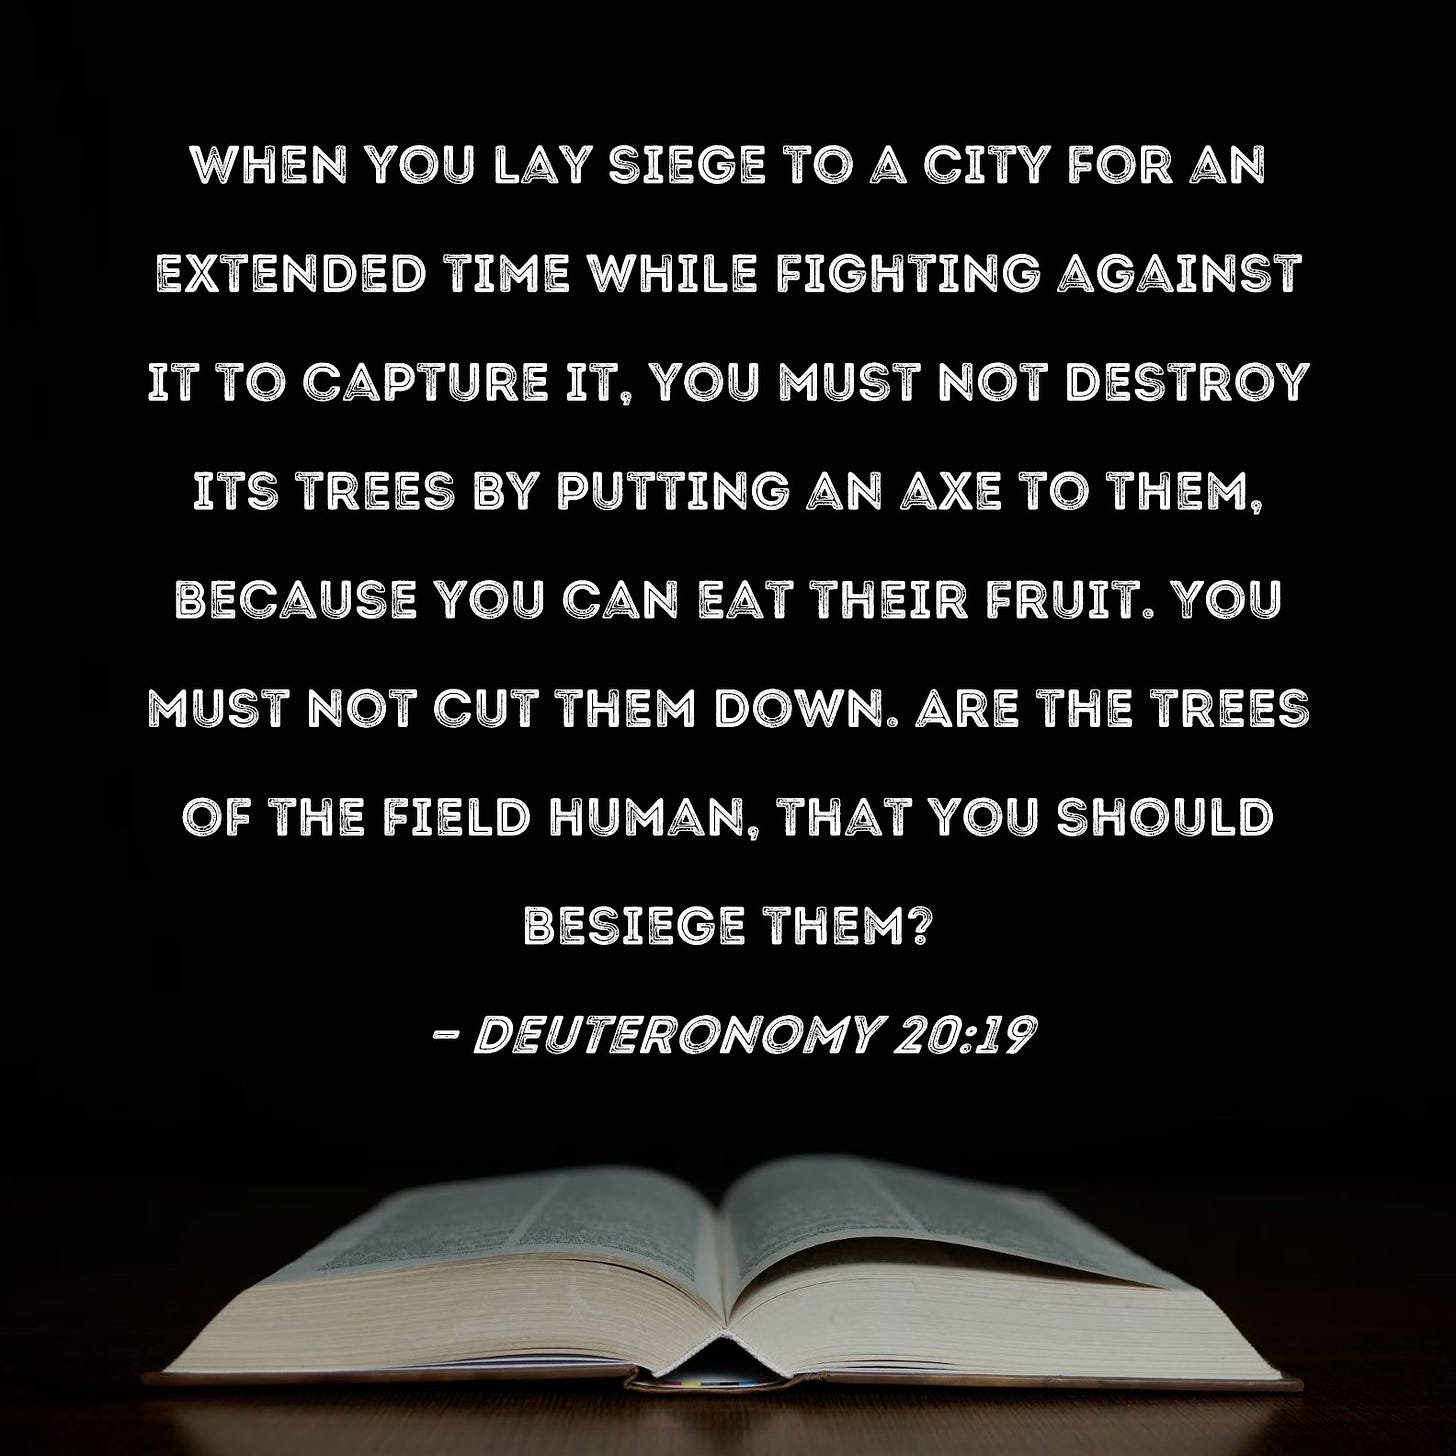 Deuteronomy 20:19 When you lay siege to a city for an extended time while  fighting against it to capture it, you must not destroy its trees by  putting an axe to them,